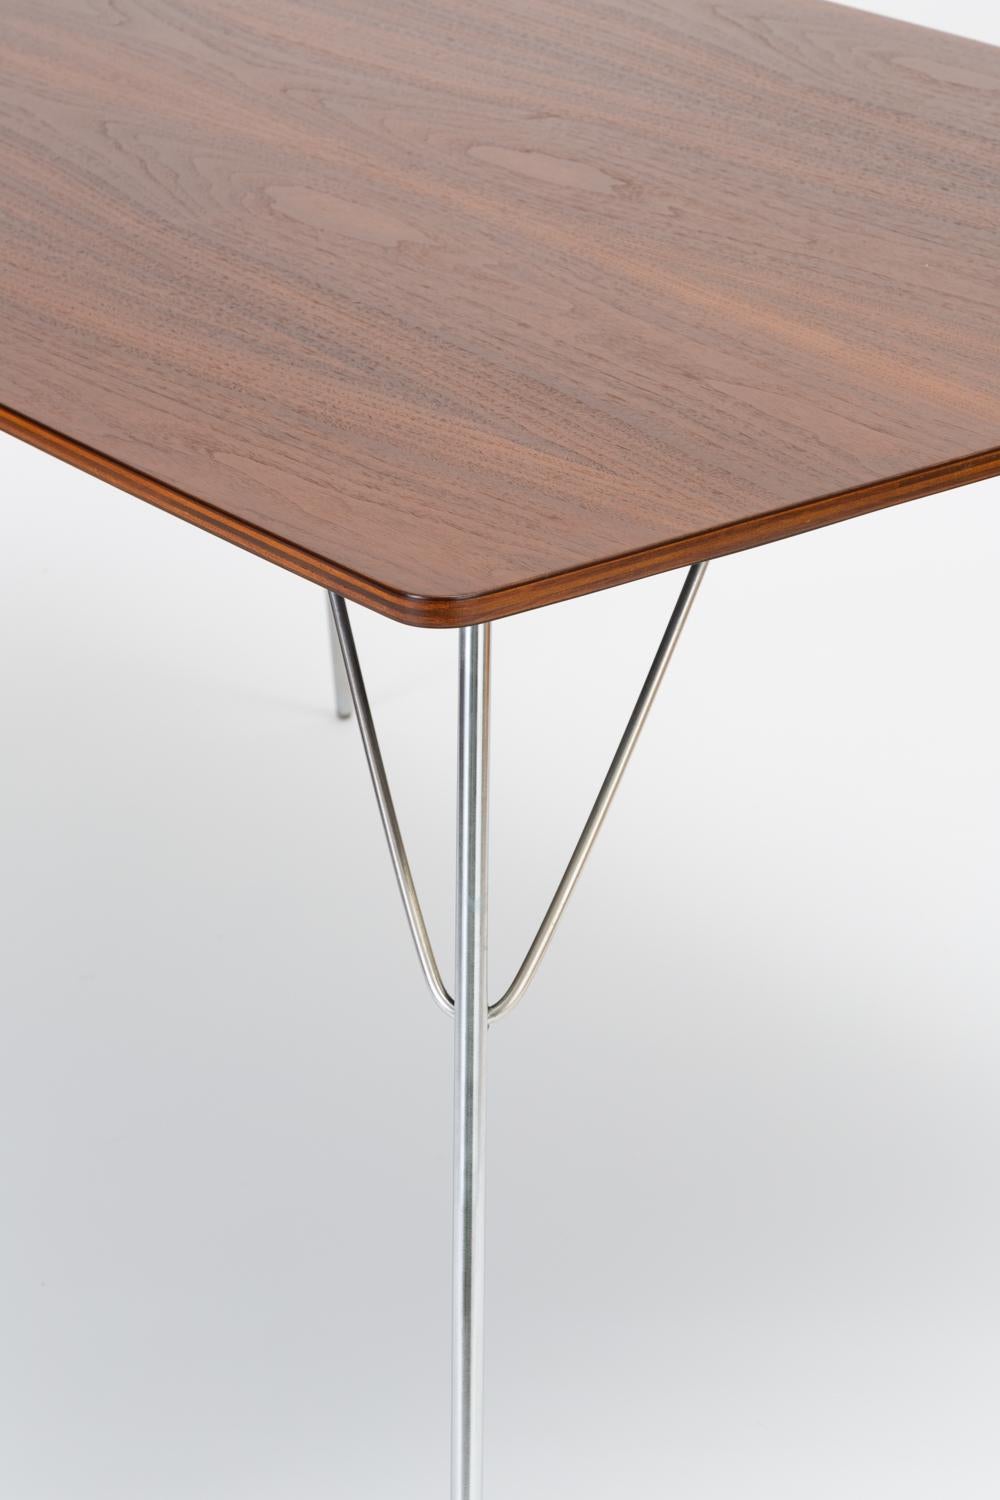 DTM-10 Rectangular Dining Table by Ray & Charles Eames for Herman Miller 6